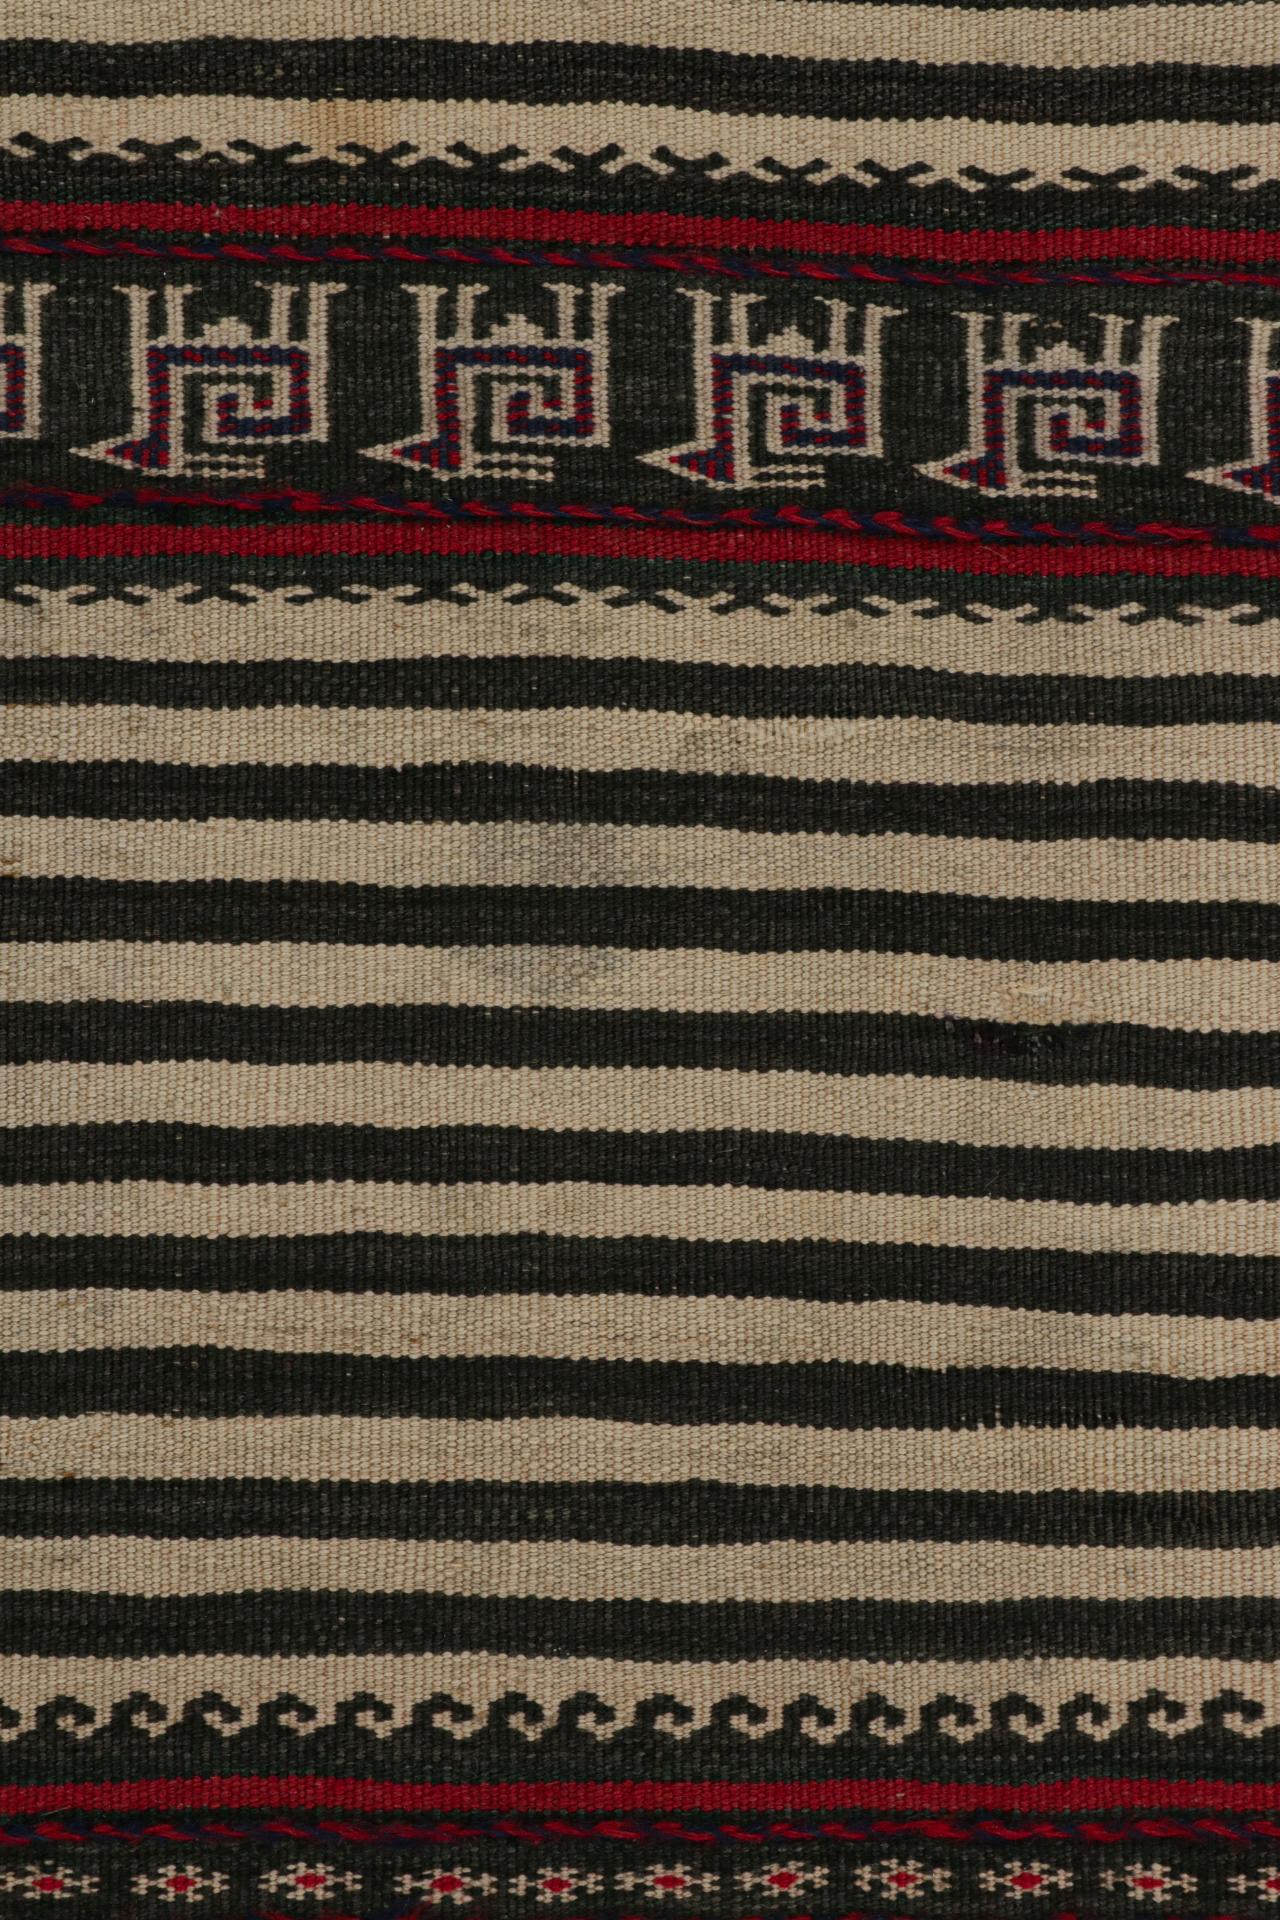 Mid-20th Century Vintage Afghan Baluch Kilim Runner Rug, with Geometric Patterns from Rug & Kilim For Sale